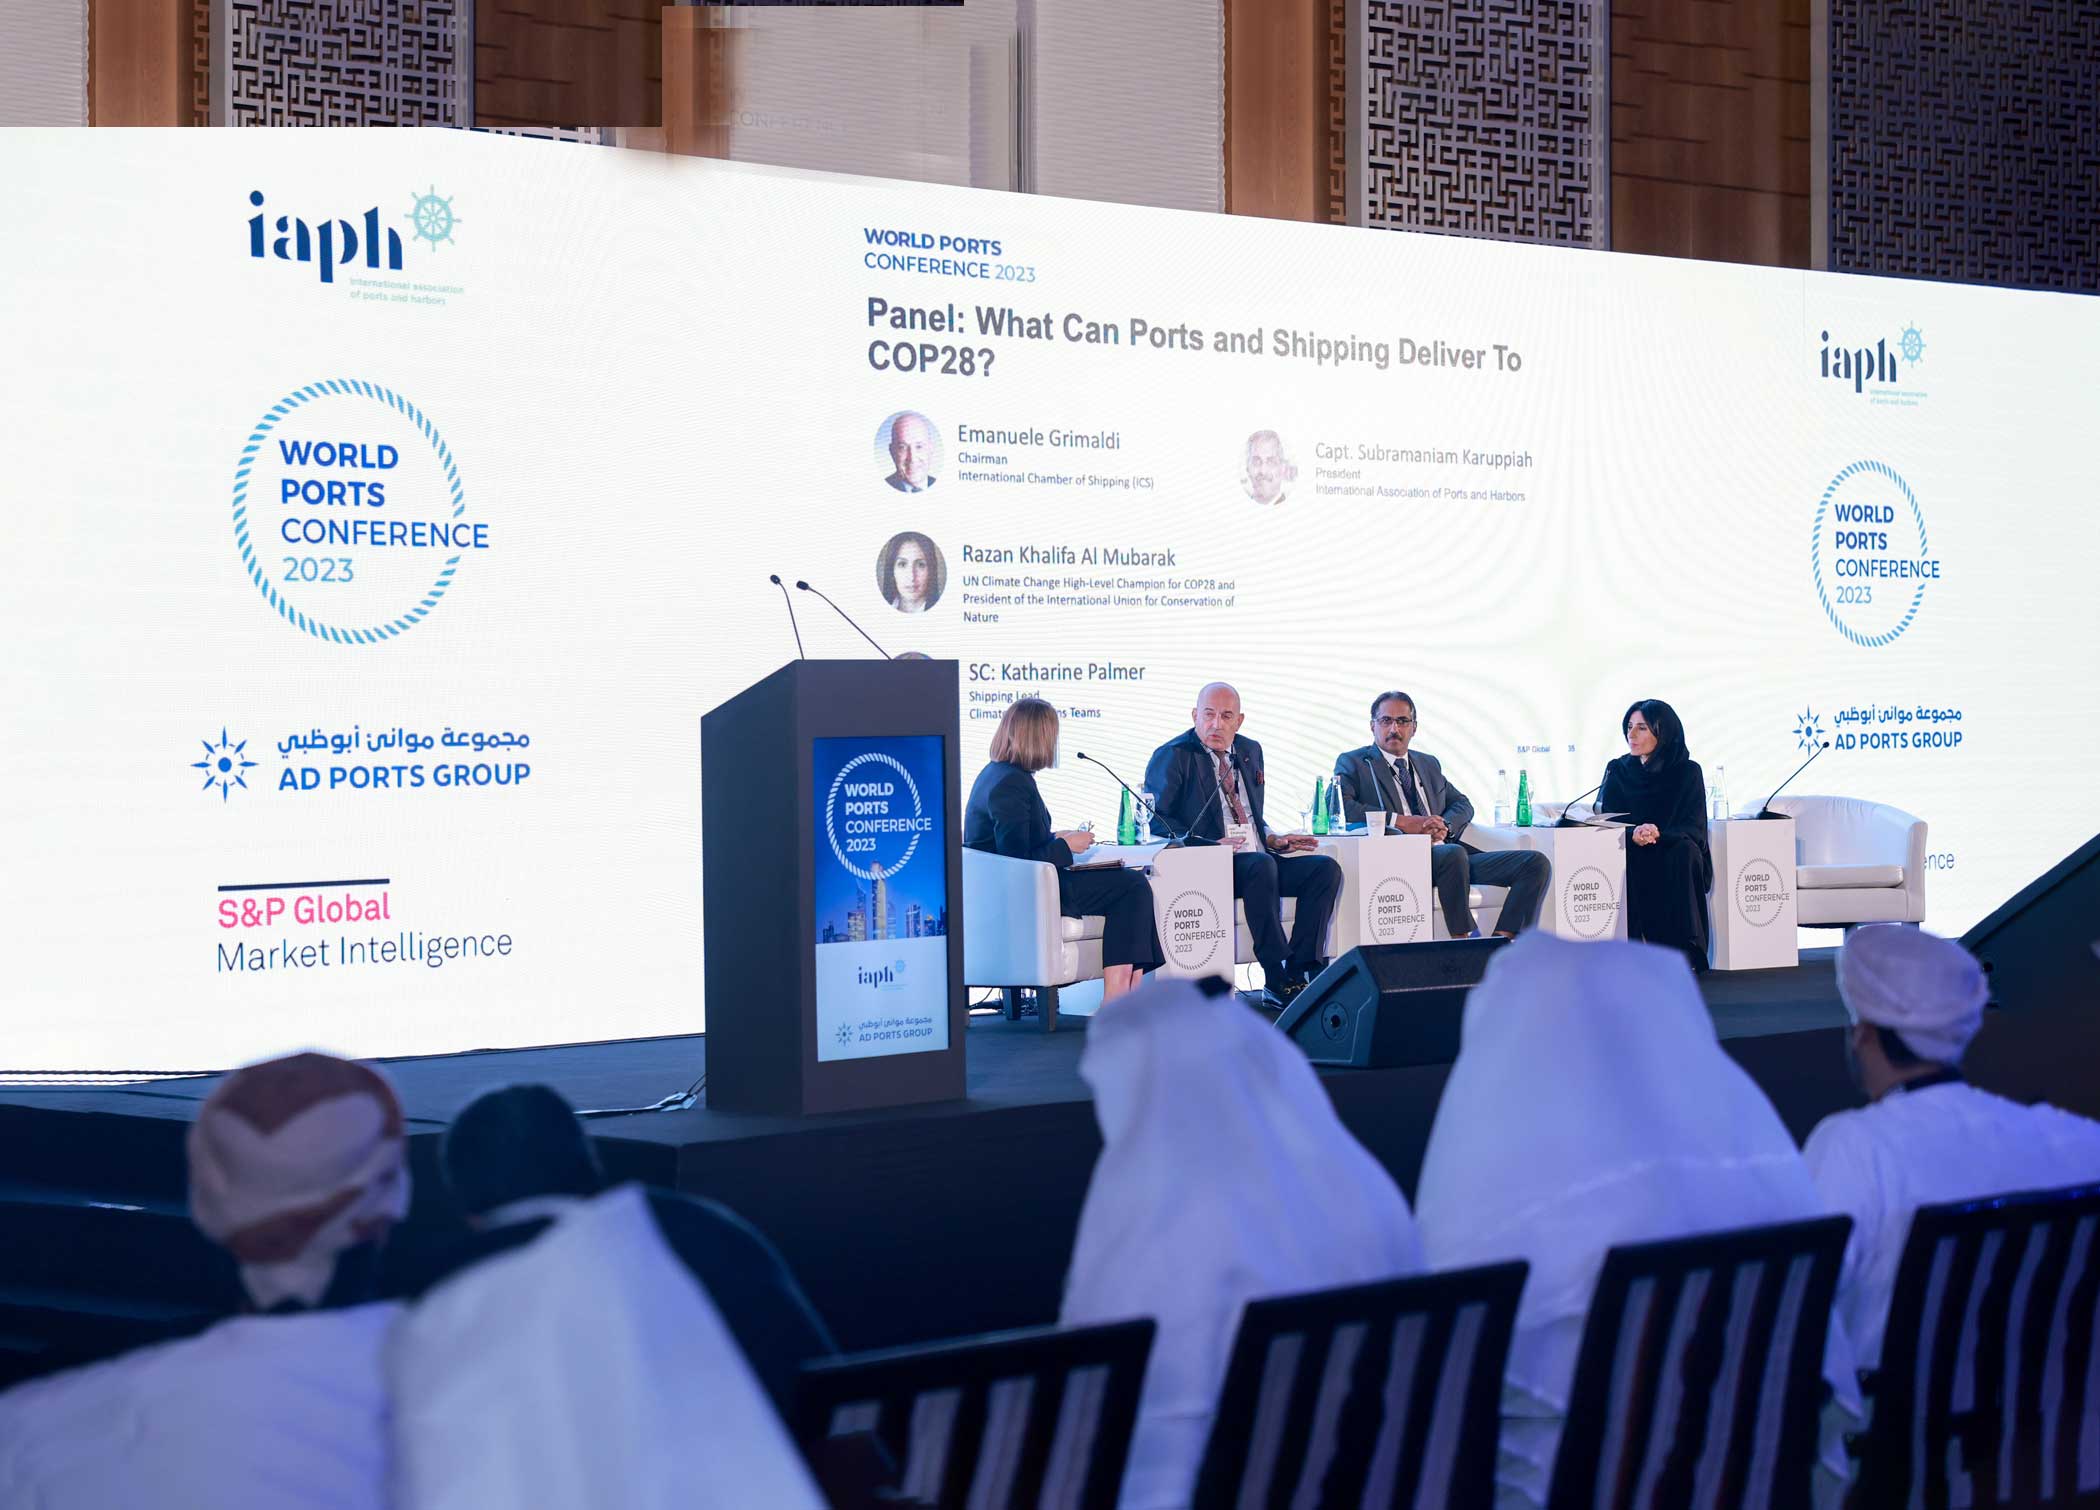 Final day of IAPH World Ports Conference Abu Dhabi 2023 Highlights Maritime Cyber Resilience and Sustainability